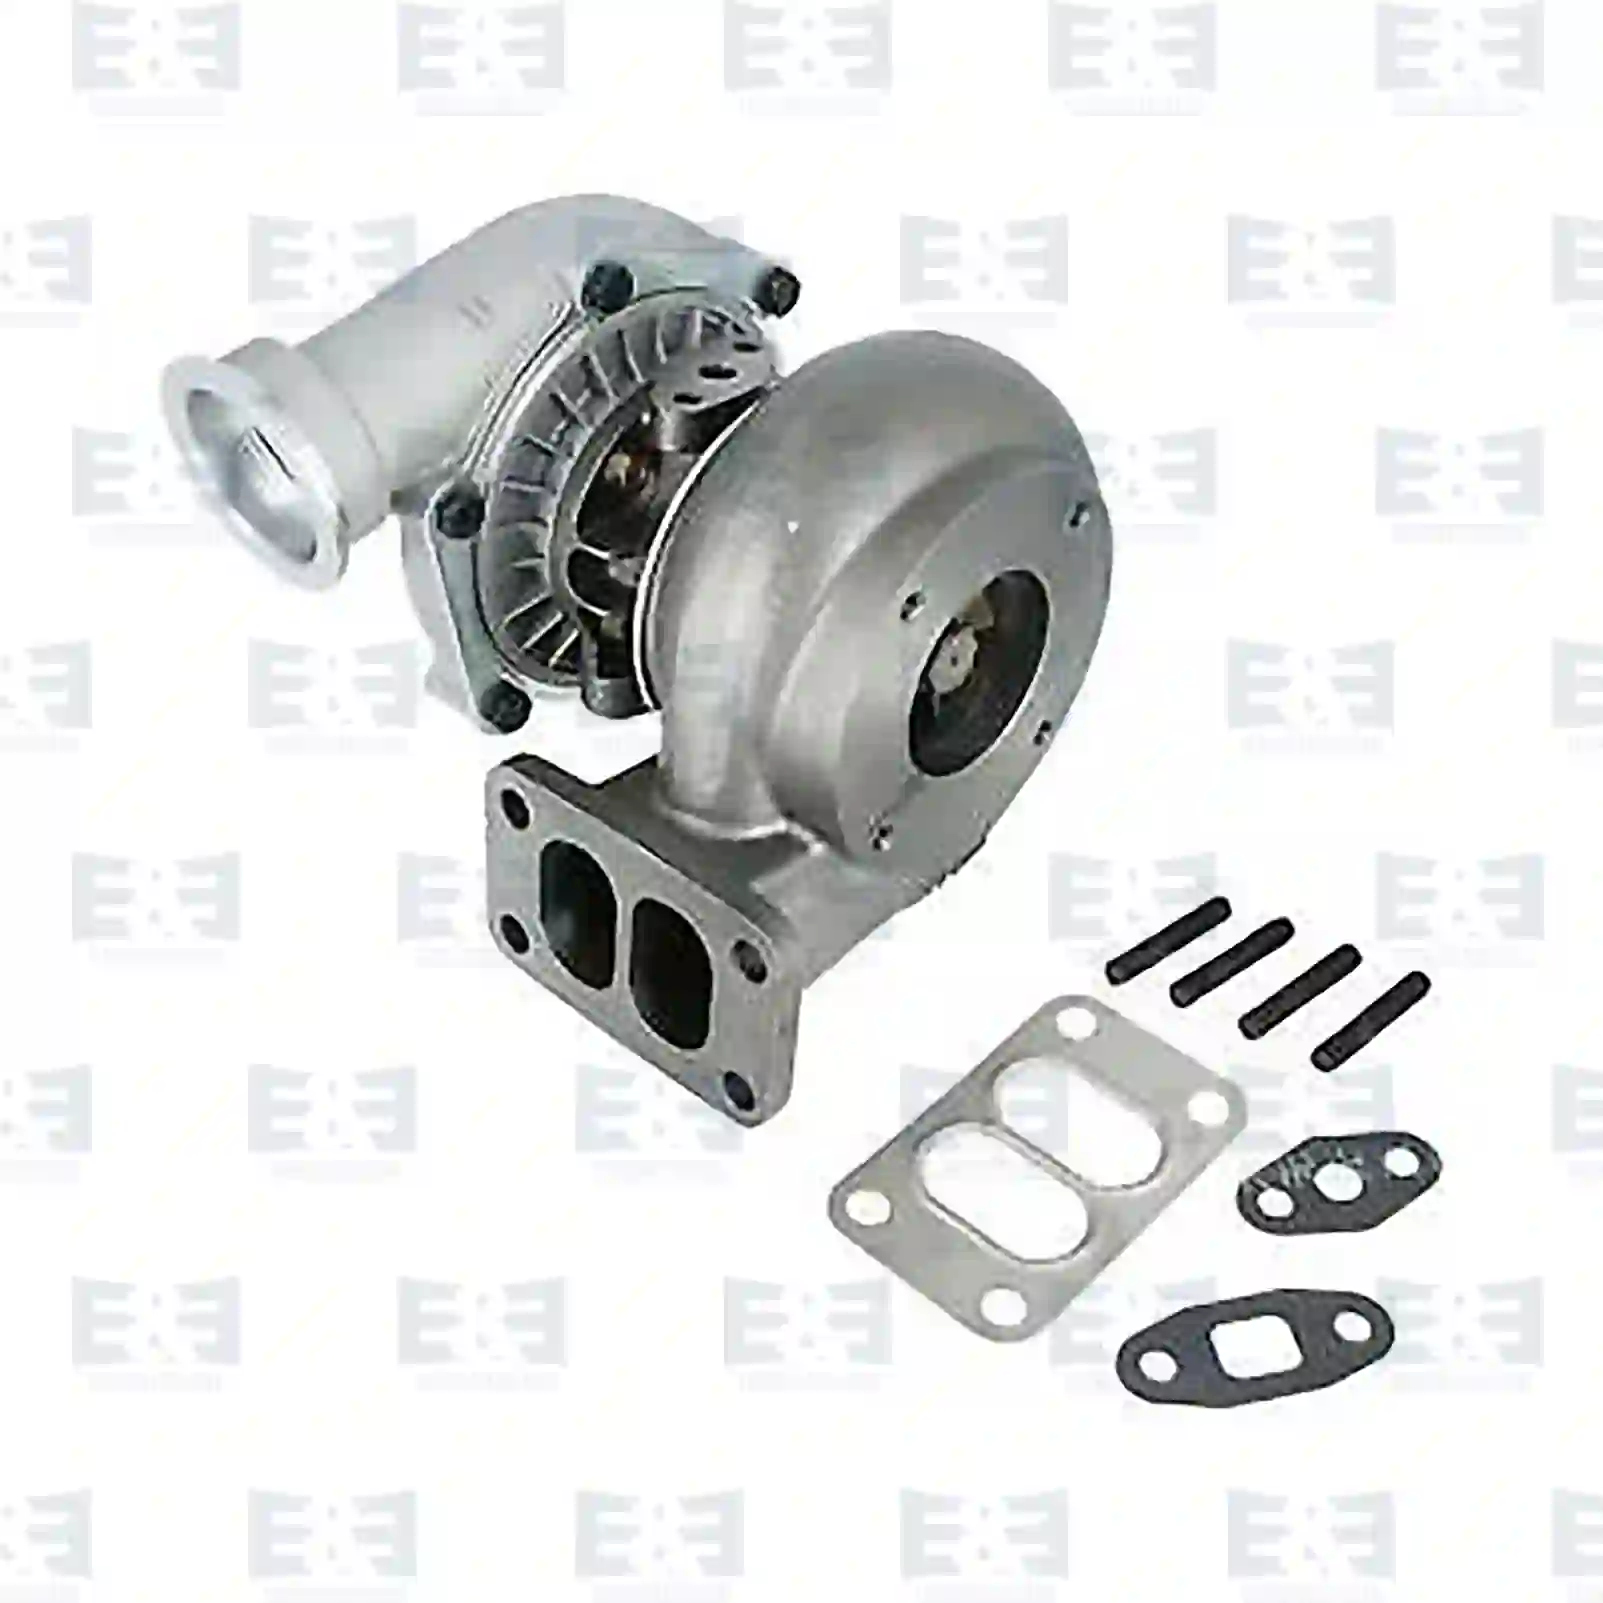 Turbocharger Turbocharger, with gasket kit, EE No 2E2200746 ,  oem no:0366964199, 3520964299, 3520964399, 3520964899, 3520964999, 3520965099, 3520965199, 3520965299, 3520965399, 3520966299, 3520966399, 3520966799, 3520966899, 3520968299, 3520968399, 3520968499, 3520968599, 3660960099, 3660960199, 3660960299, 366096029980, 3660960399, 3660960499, 3660960699, 3660960799, 3660960899, 3660960999, 3660961099, 3660961299, 3660961399, 3660961499, 3660961599, 3660961699, 3660961899, 3660961999, 3660962299, 3660962699, 3660962799, 3660962899, 3660962999, 3660963099, 3660963499, 3660963899, 3660964299, 3660965599, 3660965799, 3660966199, 3660966699, 3660968699, 3760960099, 3760960399, 3760960699 E&E Truck Spare Parts | Truck Spare Parts, Auotomotive Spare Parts